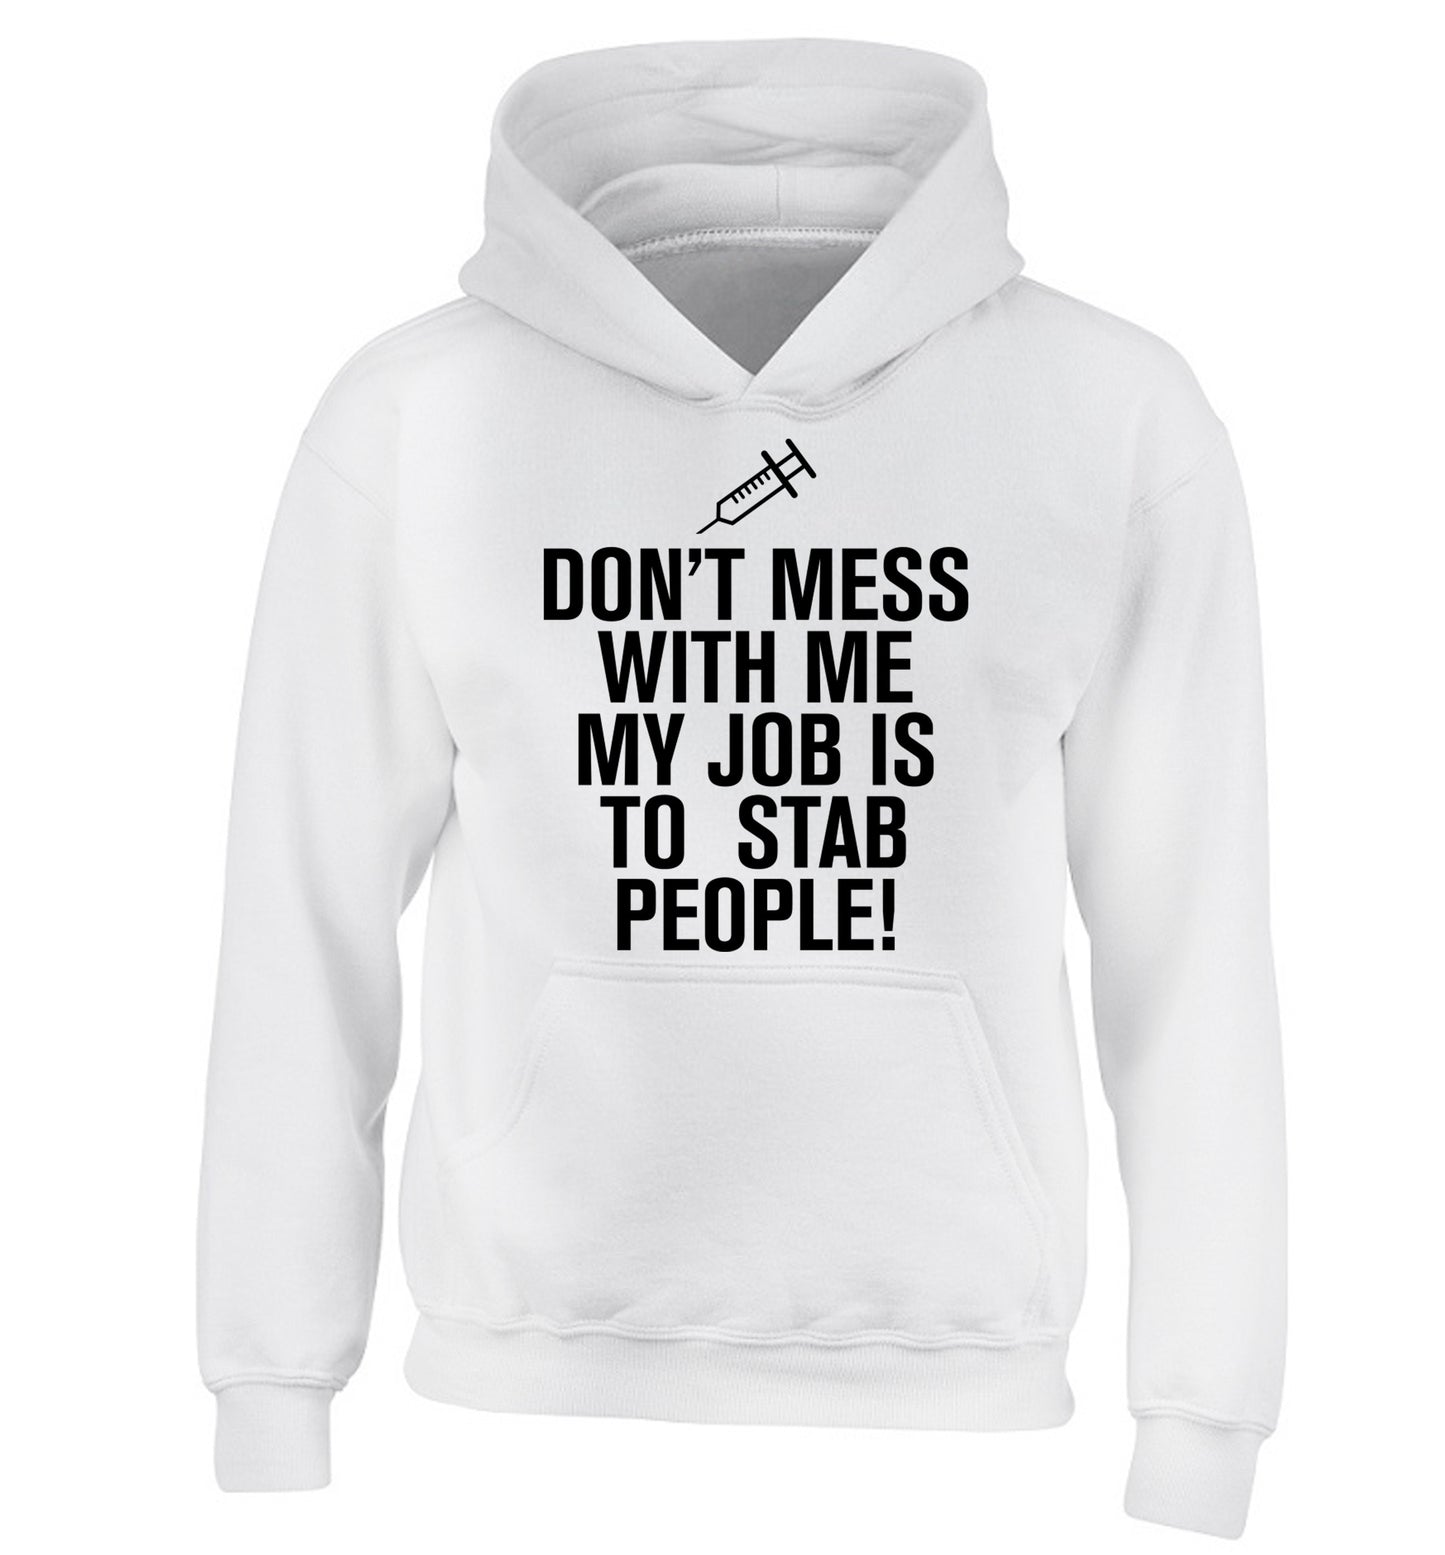 Don't mess with me my job is to stab people! children's white hoodie 12-14 Years